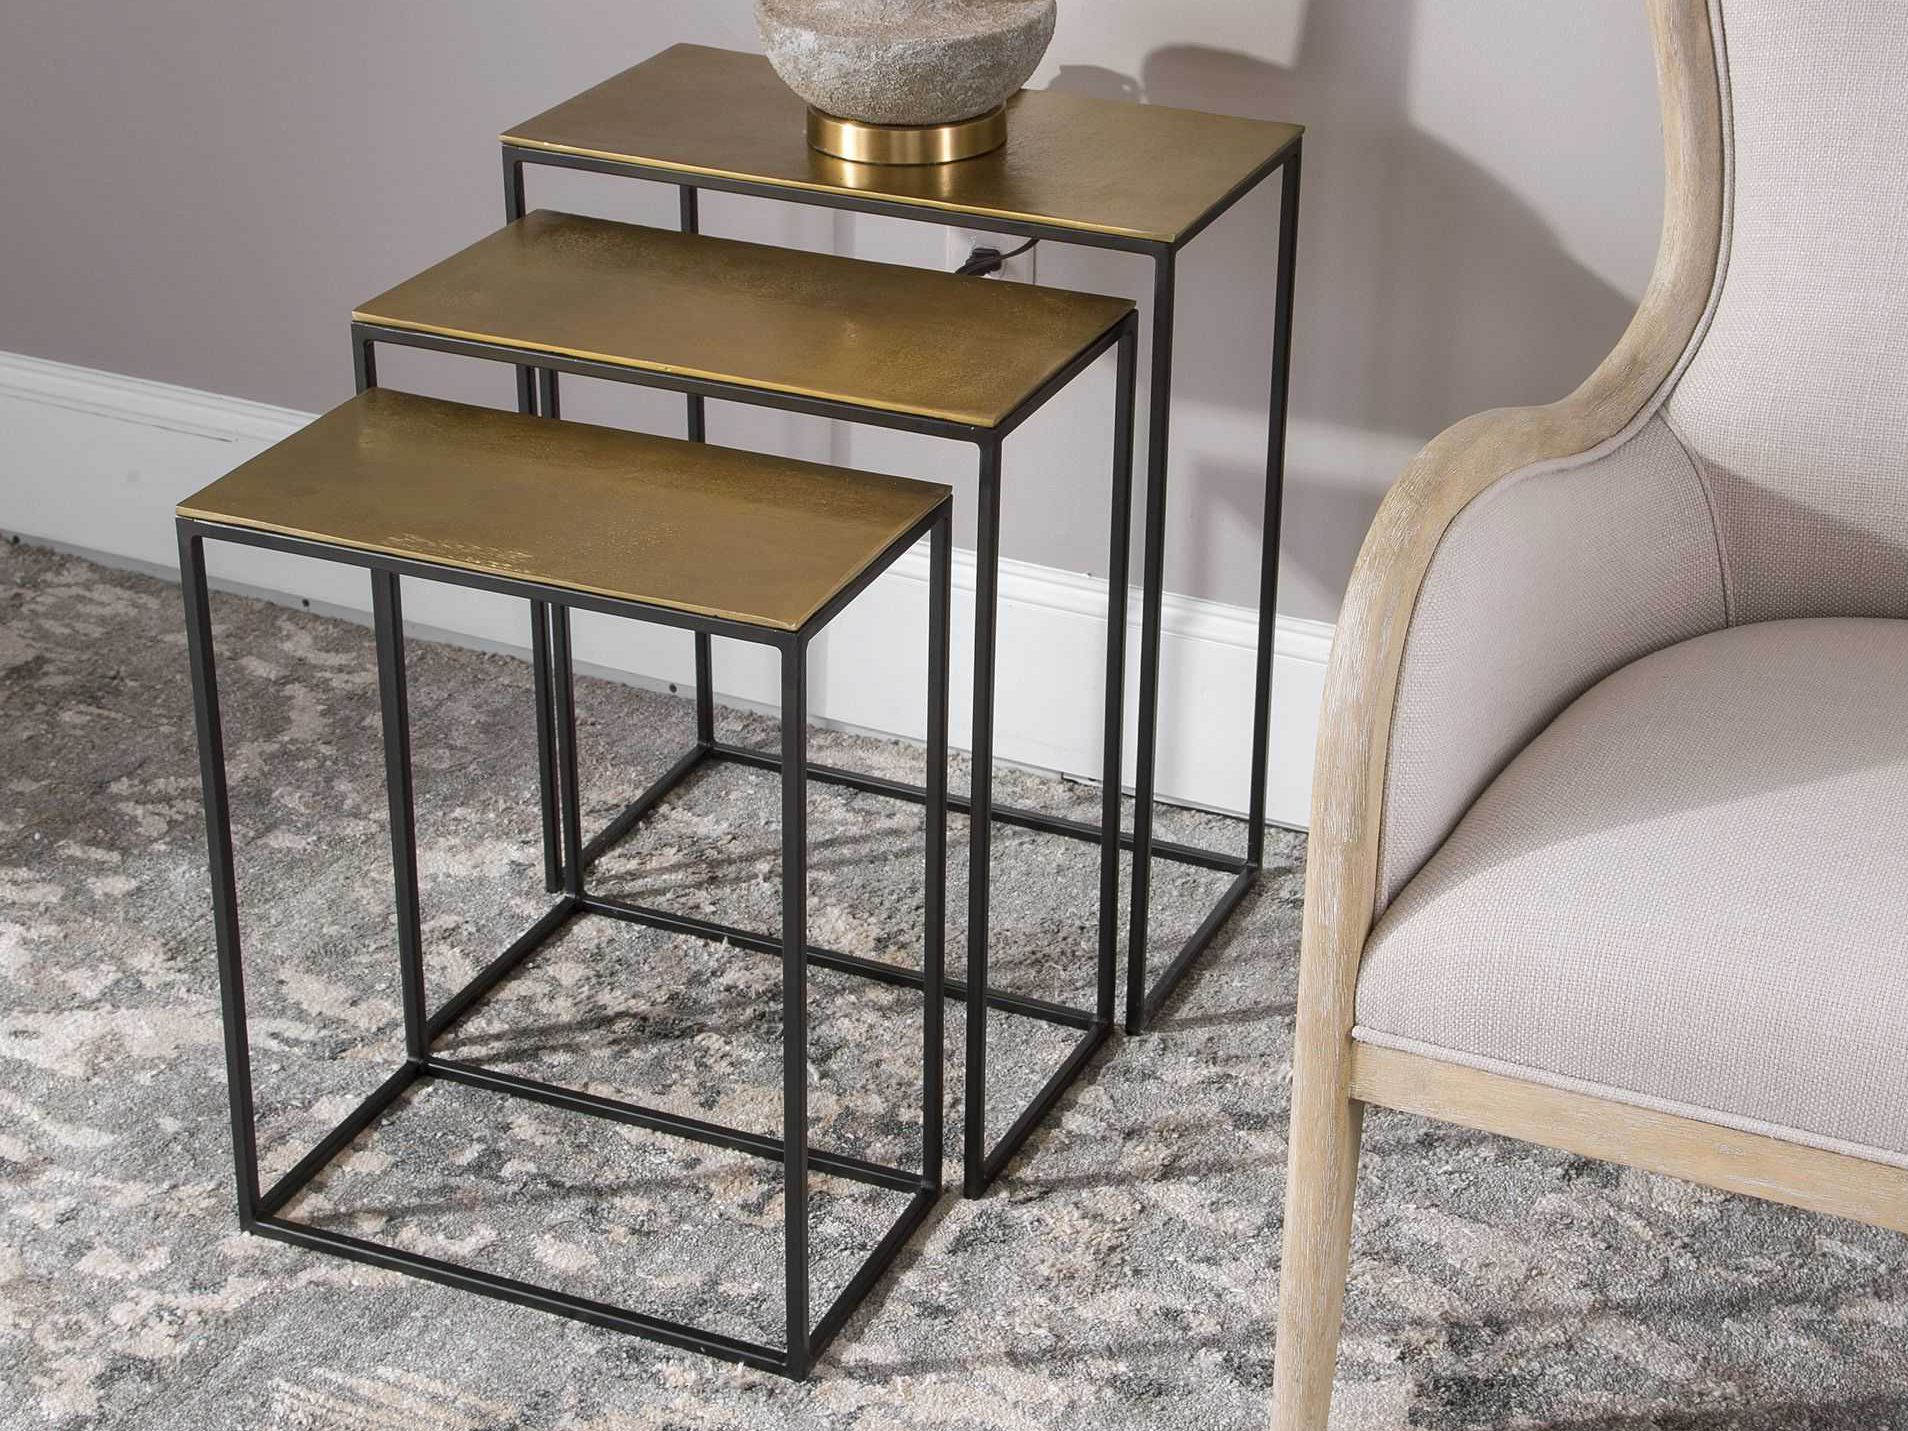 Antique Gold Nesting Tables – Designed To Nest As An Over Sized Coffee Throughout Antique Gold Nesting Console Tables (View 9 of 20)